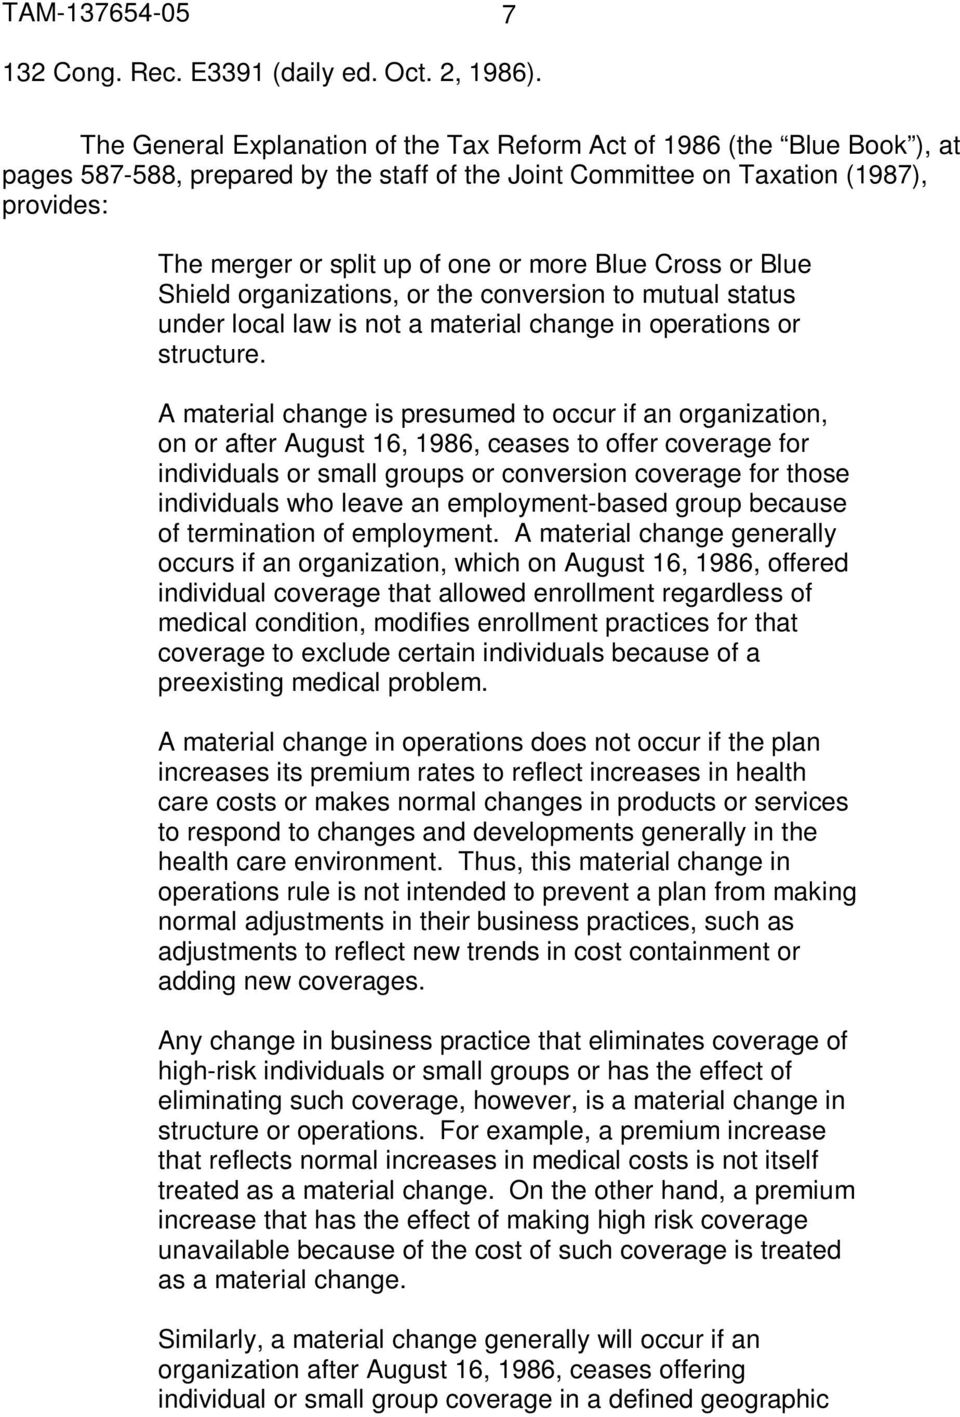 more Blue Cross or Blue Shield organizations, or the conversion to mutual status under local law is not a material change in operations or structure.